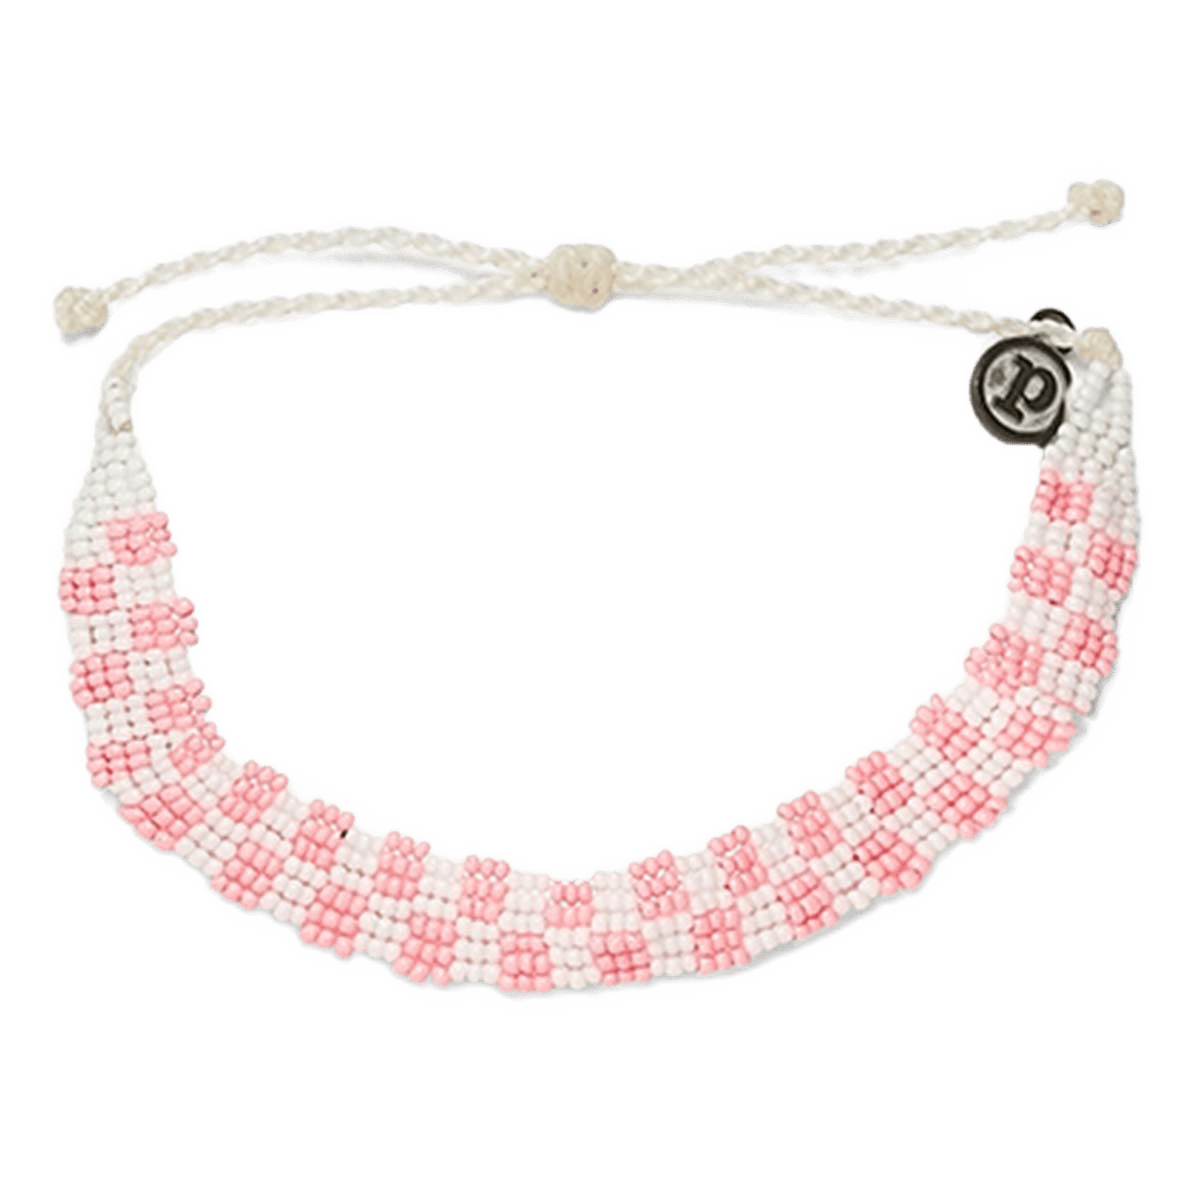 Woven Seed Bead Checkered Bracelet - Pink/White